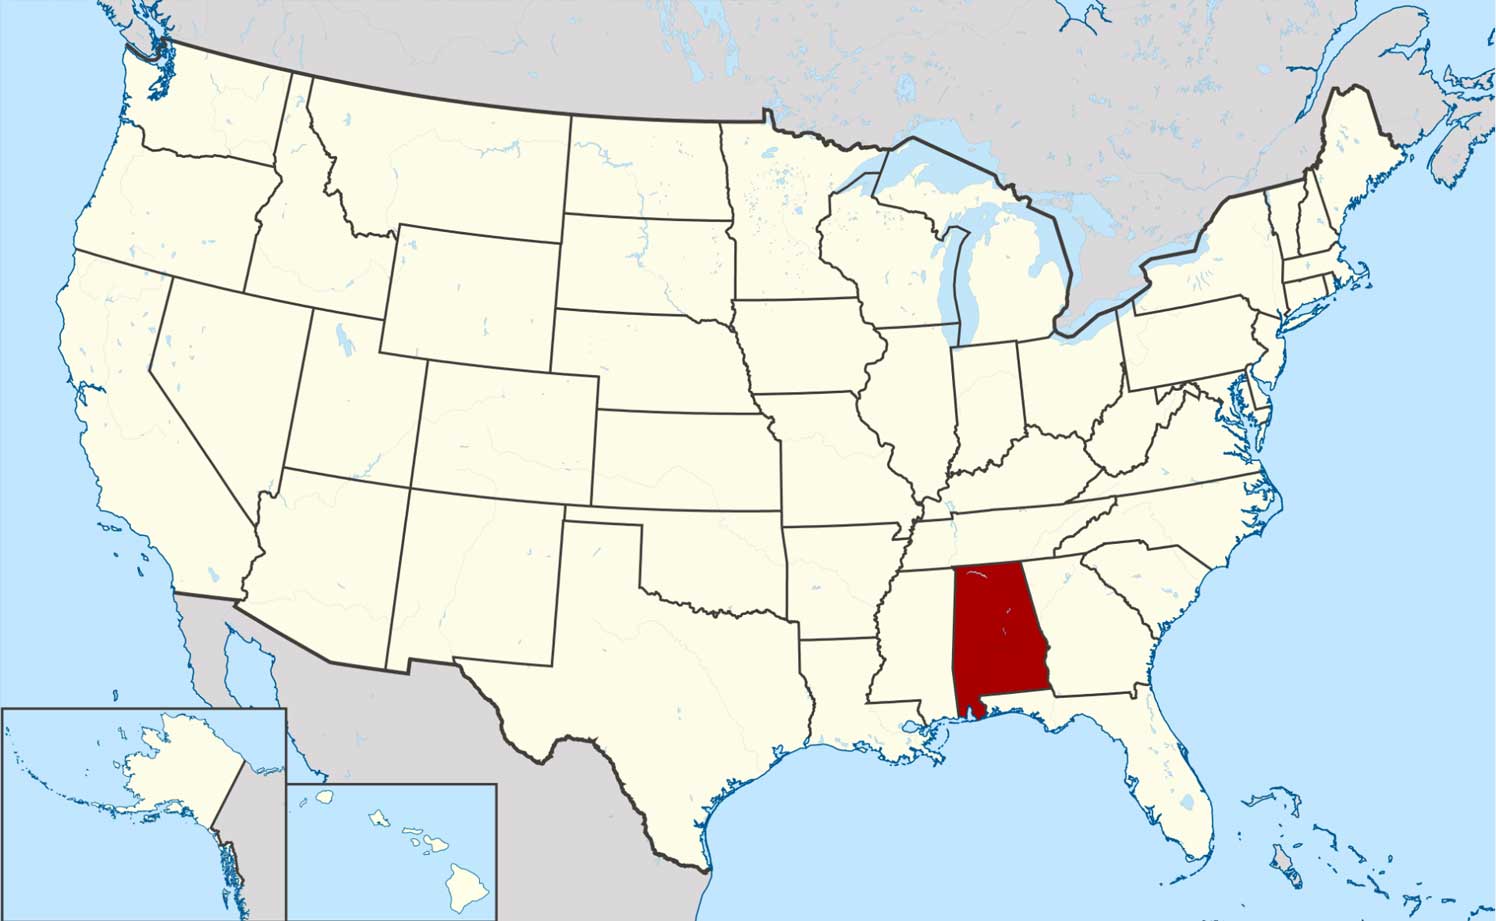 Location of Alabama State on US Map